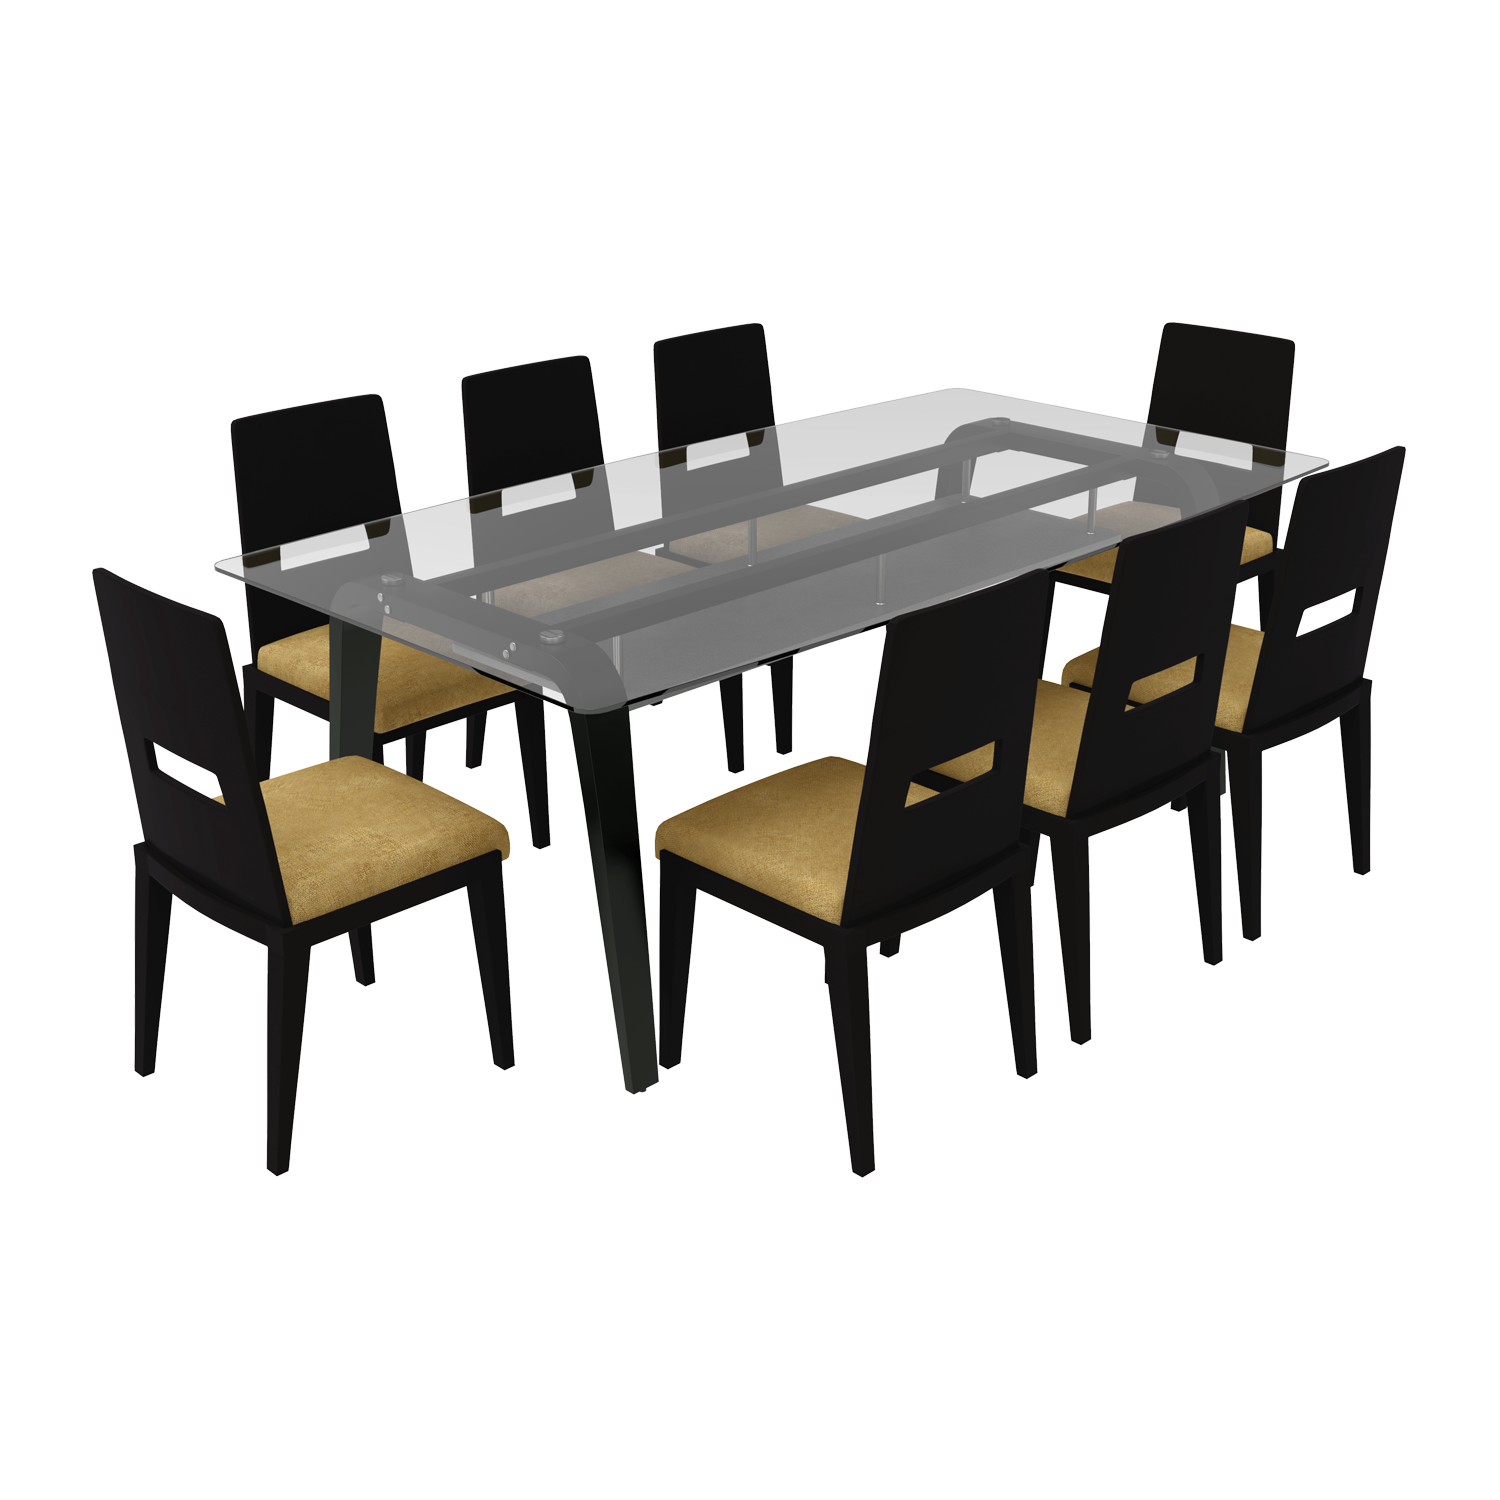 Crescent 8 Seater Dining Table Set, What Size Is A 8 Seater Dining Table